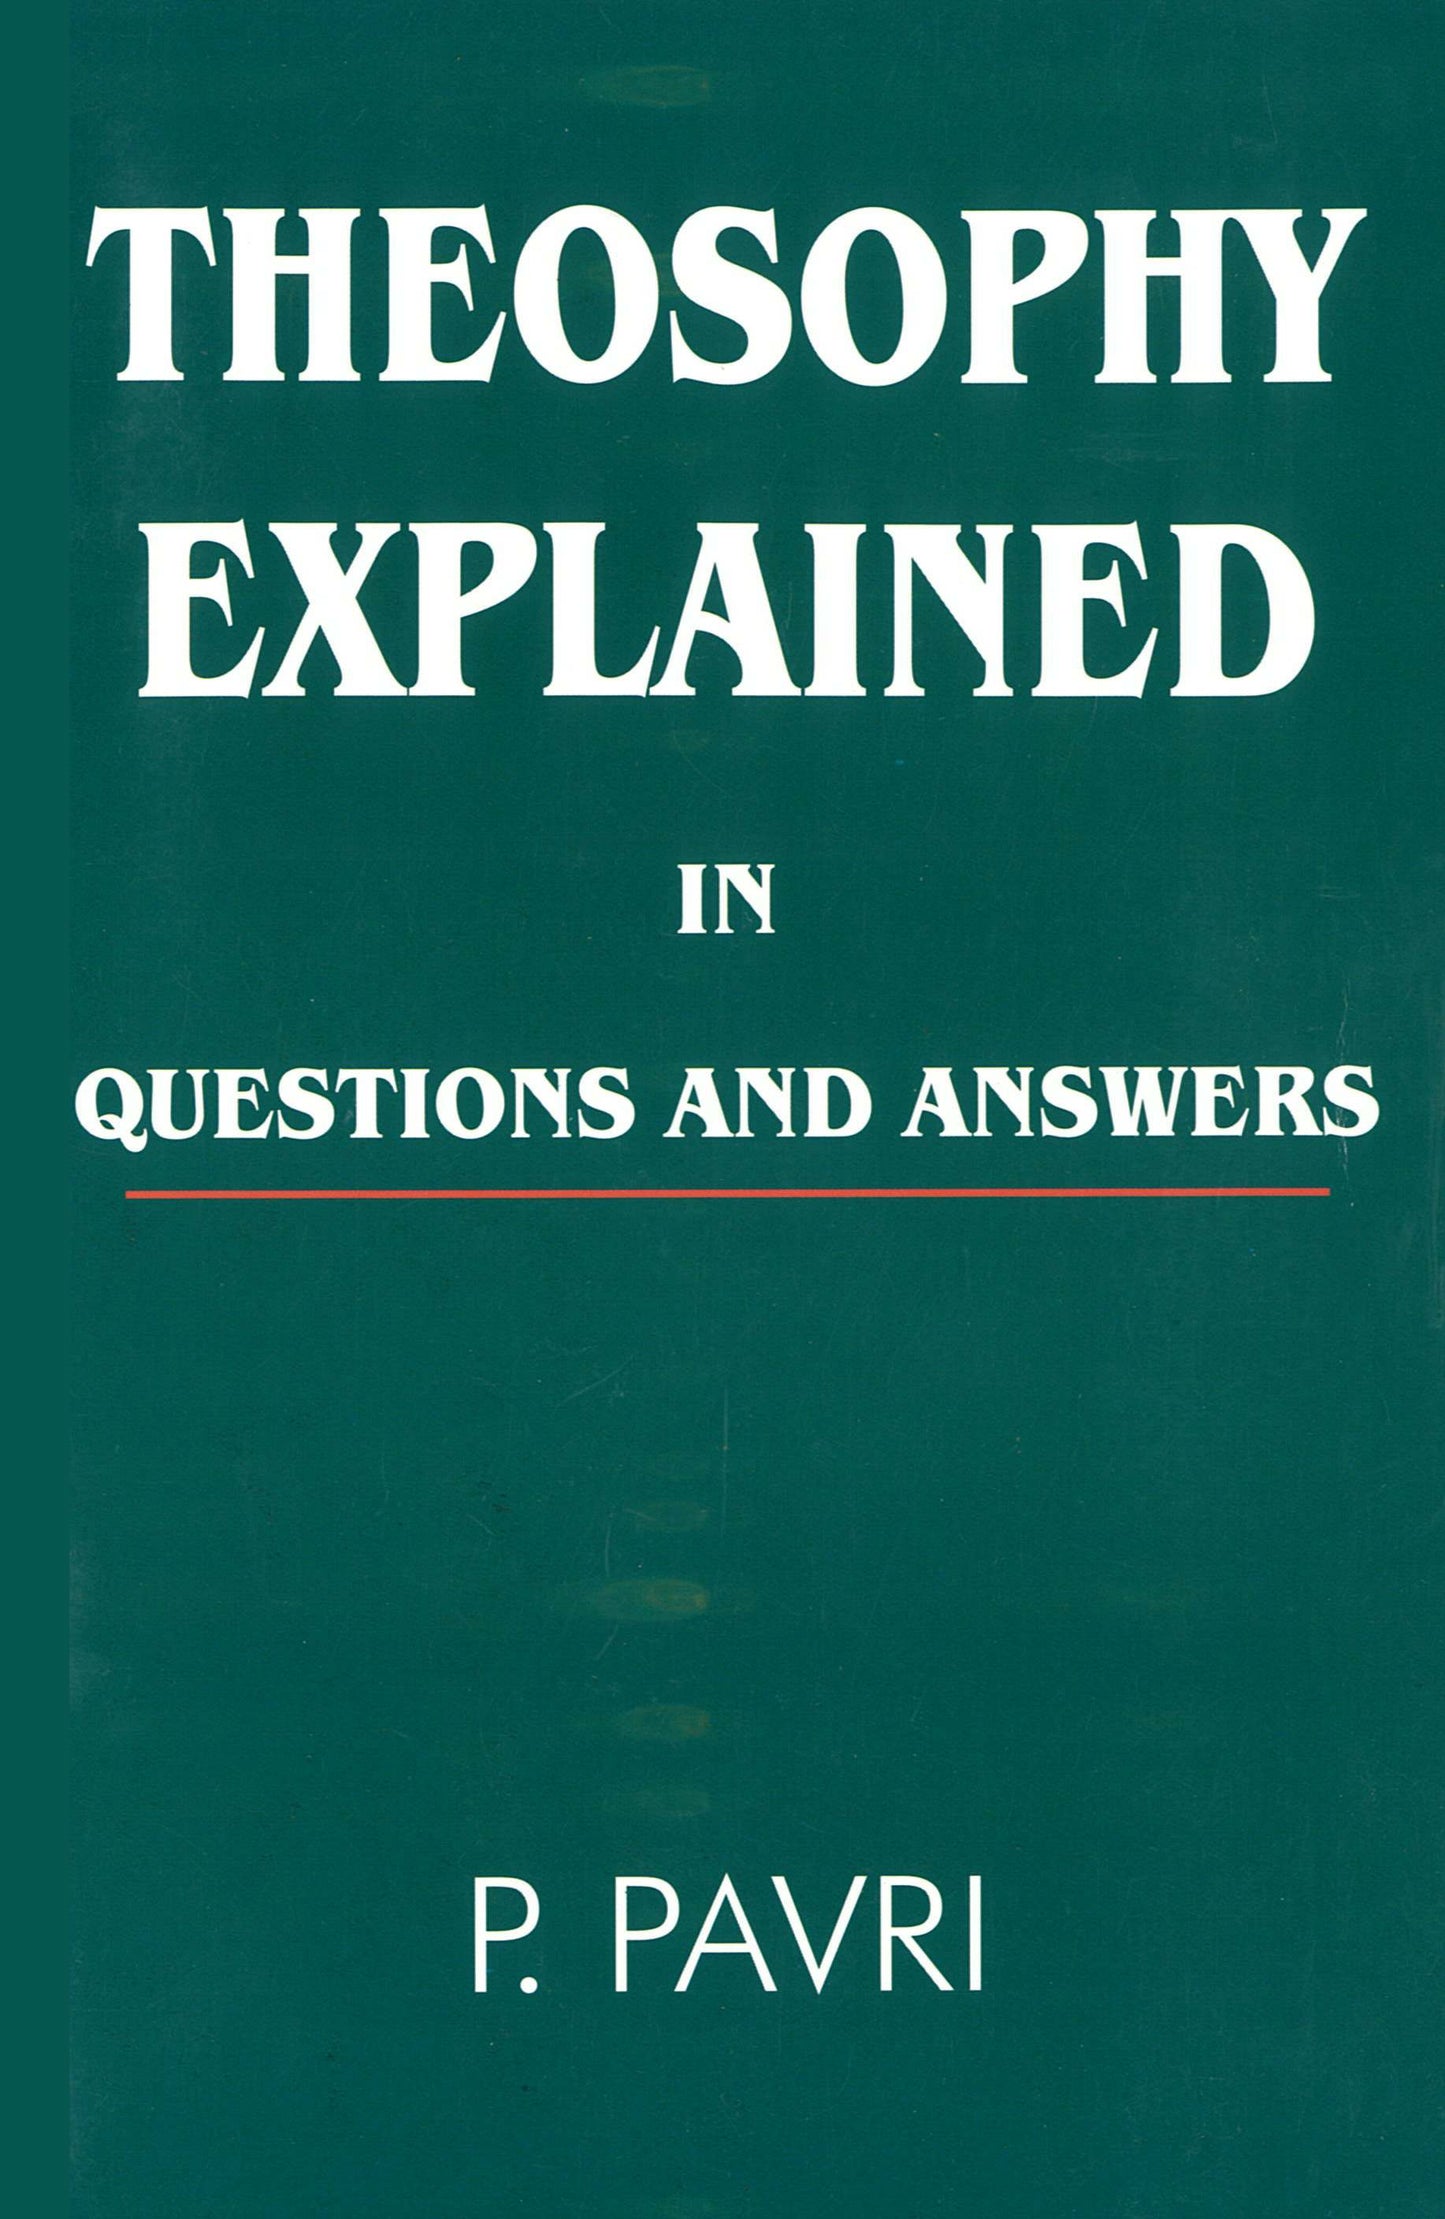 Theosophy Explained in Questions & Answers